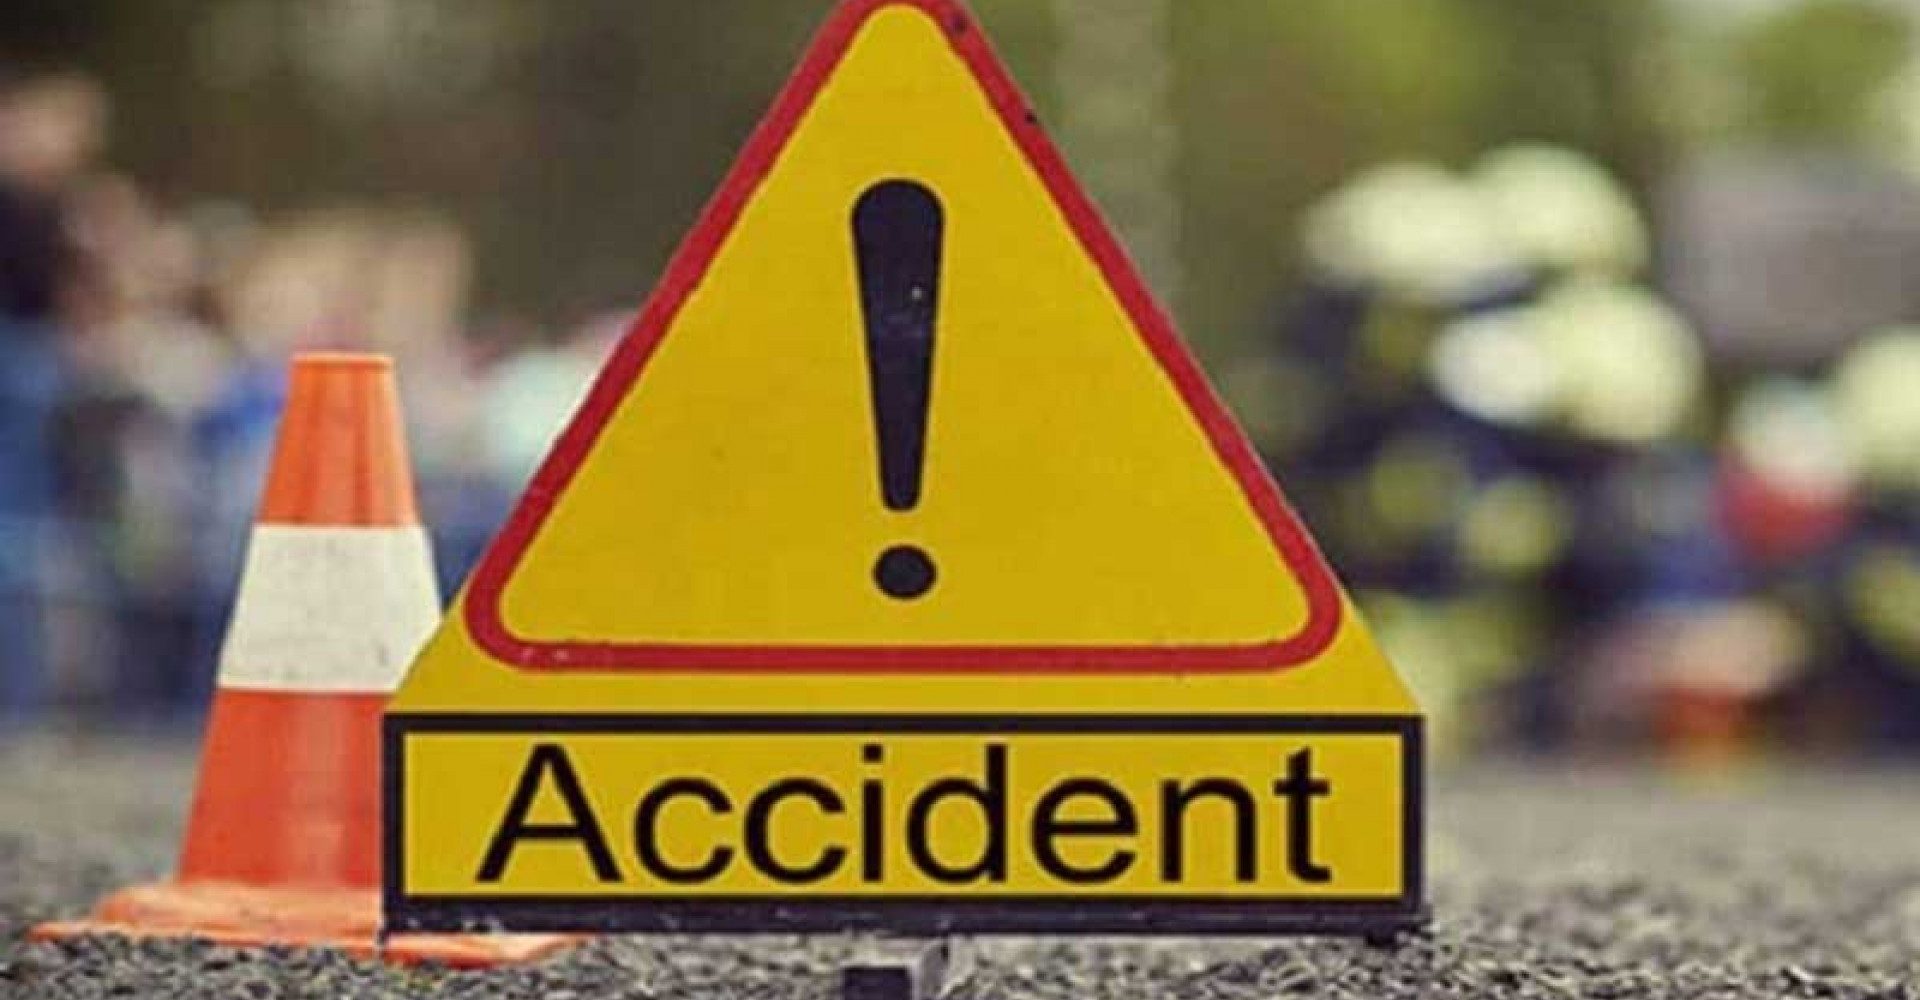 Driver injured in accident dies